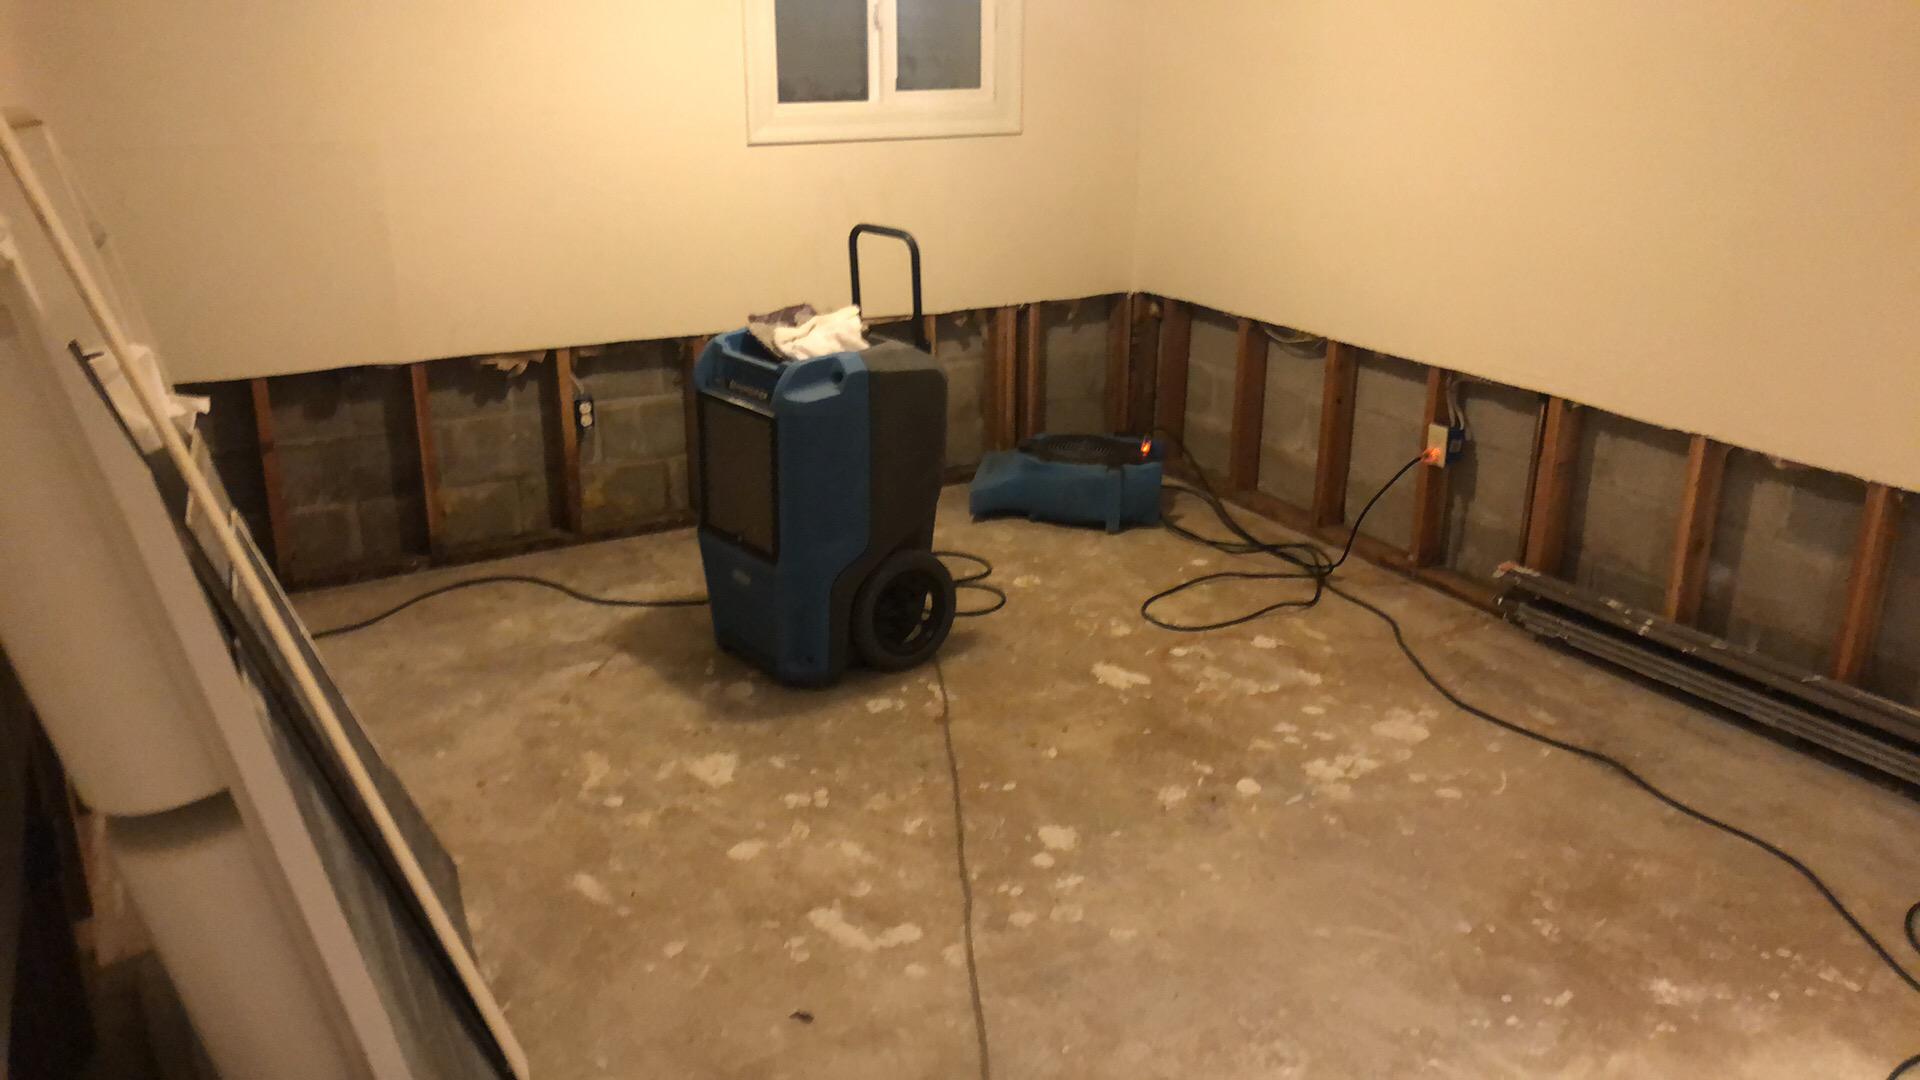 Affected materials removed from basement room